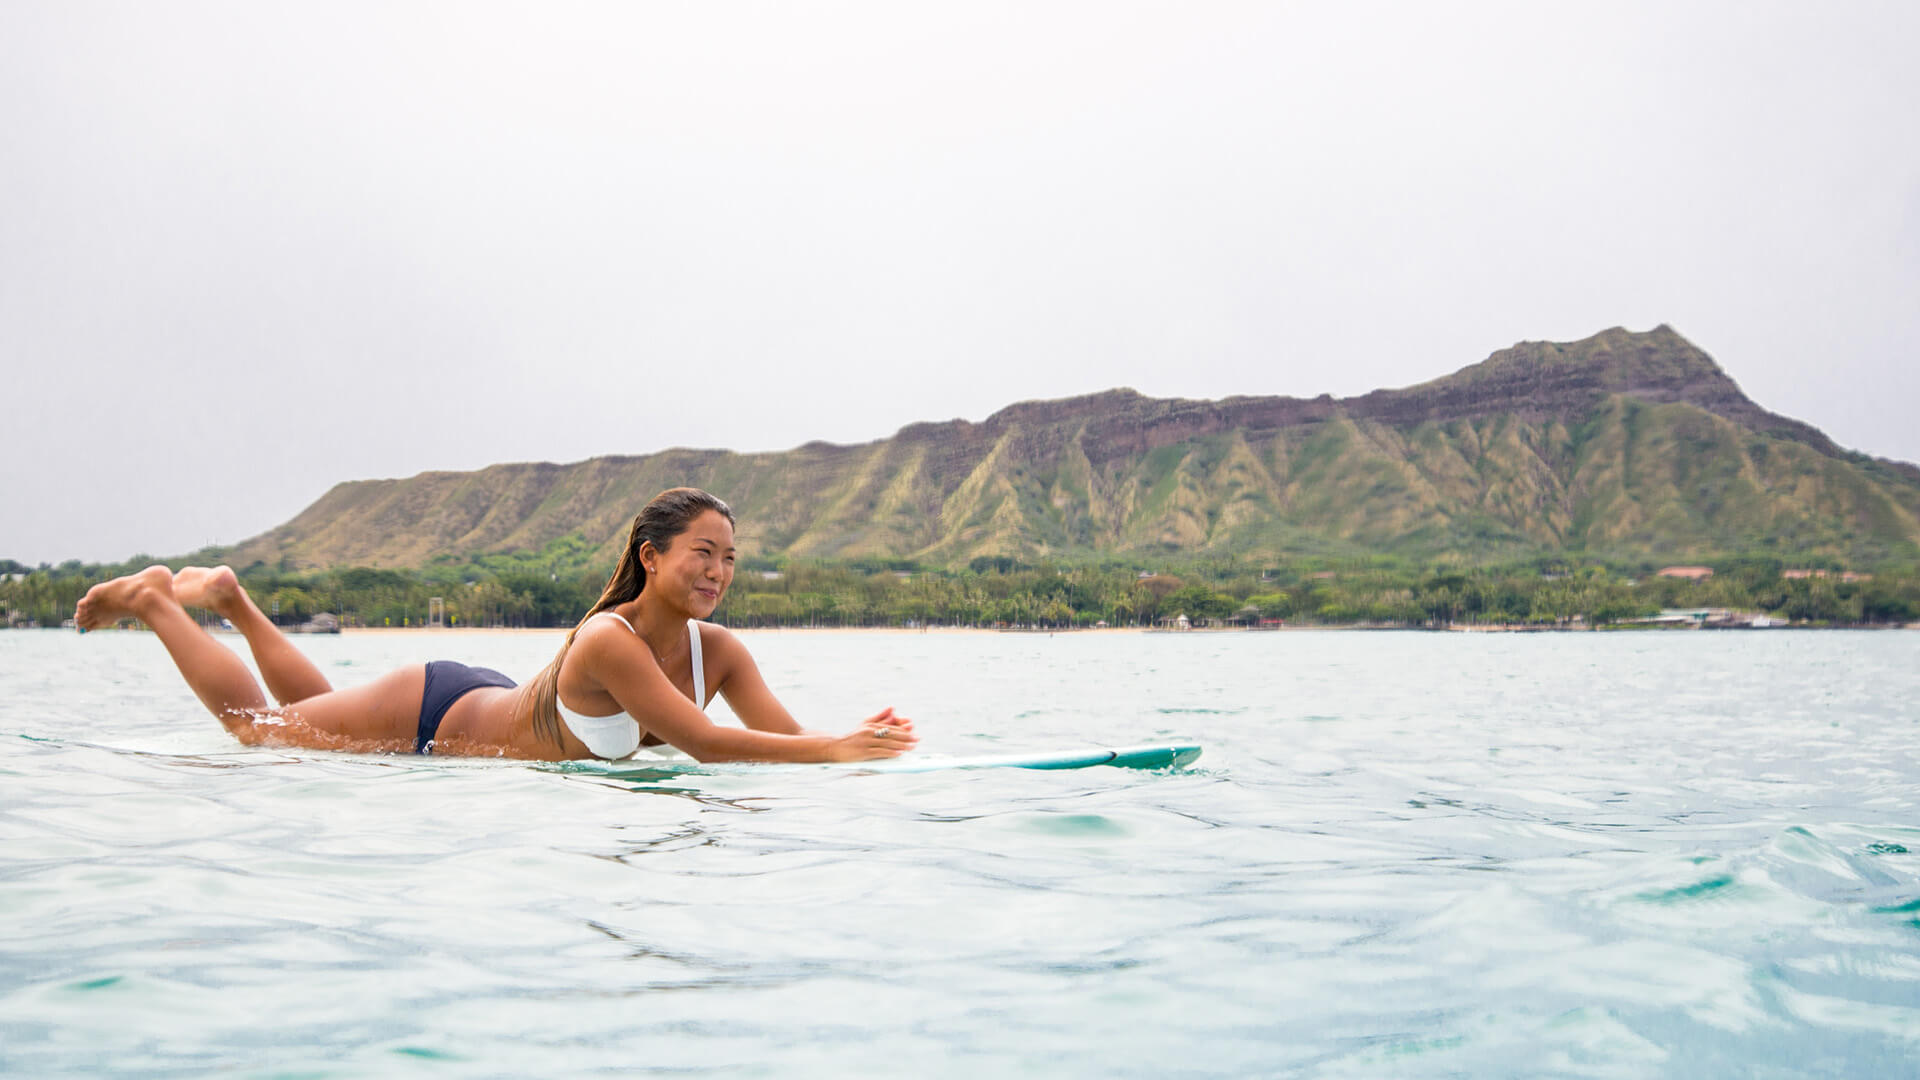 Woman on surfboard with Diamond Head in the background